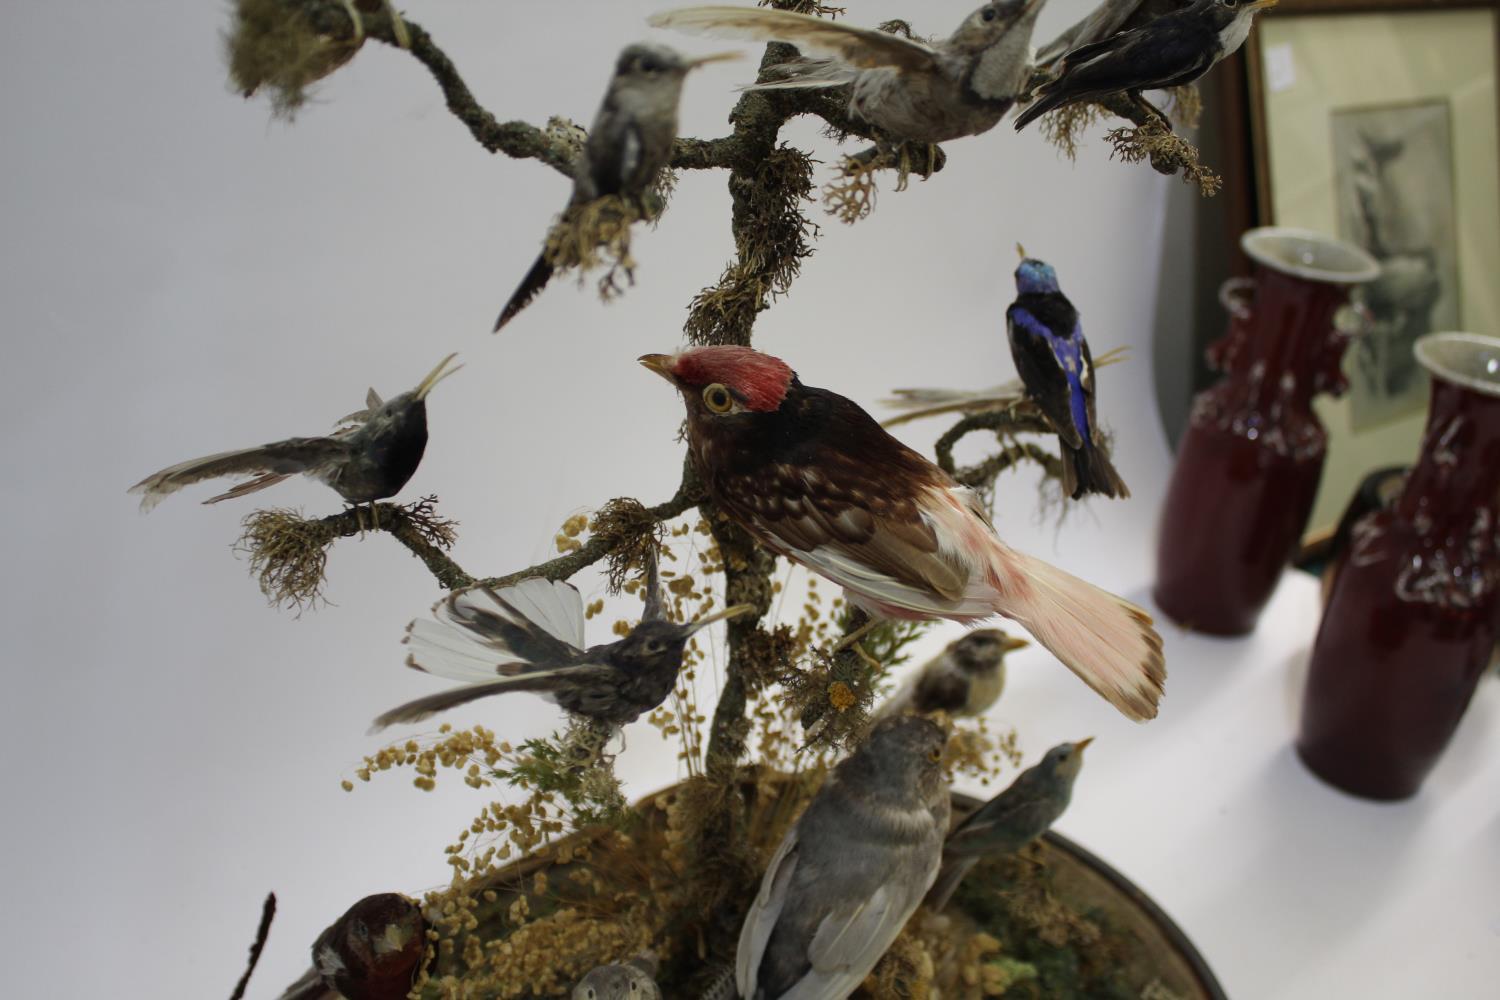 VICTORIAN CASED BIRDS & GLASS DOME - DIORAMA a large display of exotic stuffed birds including - Image 5 of 10